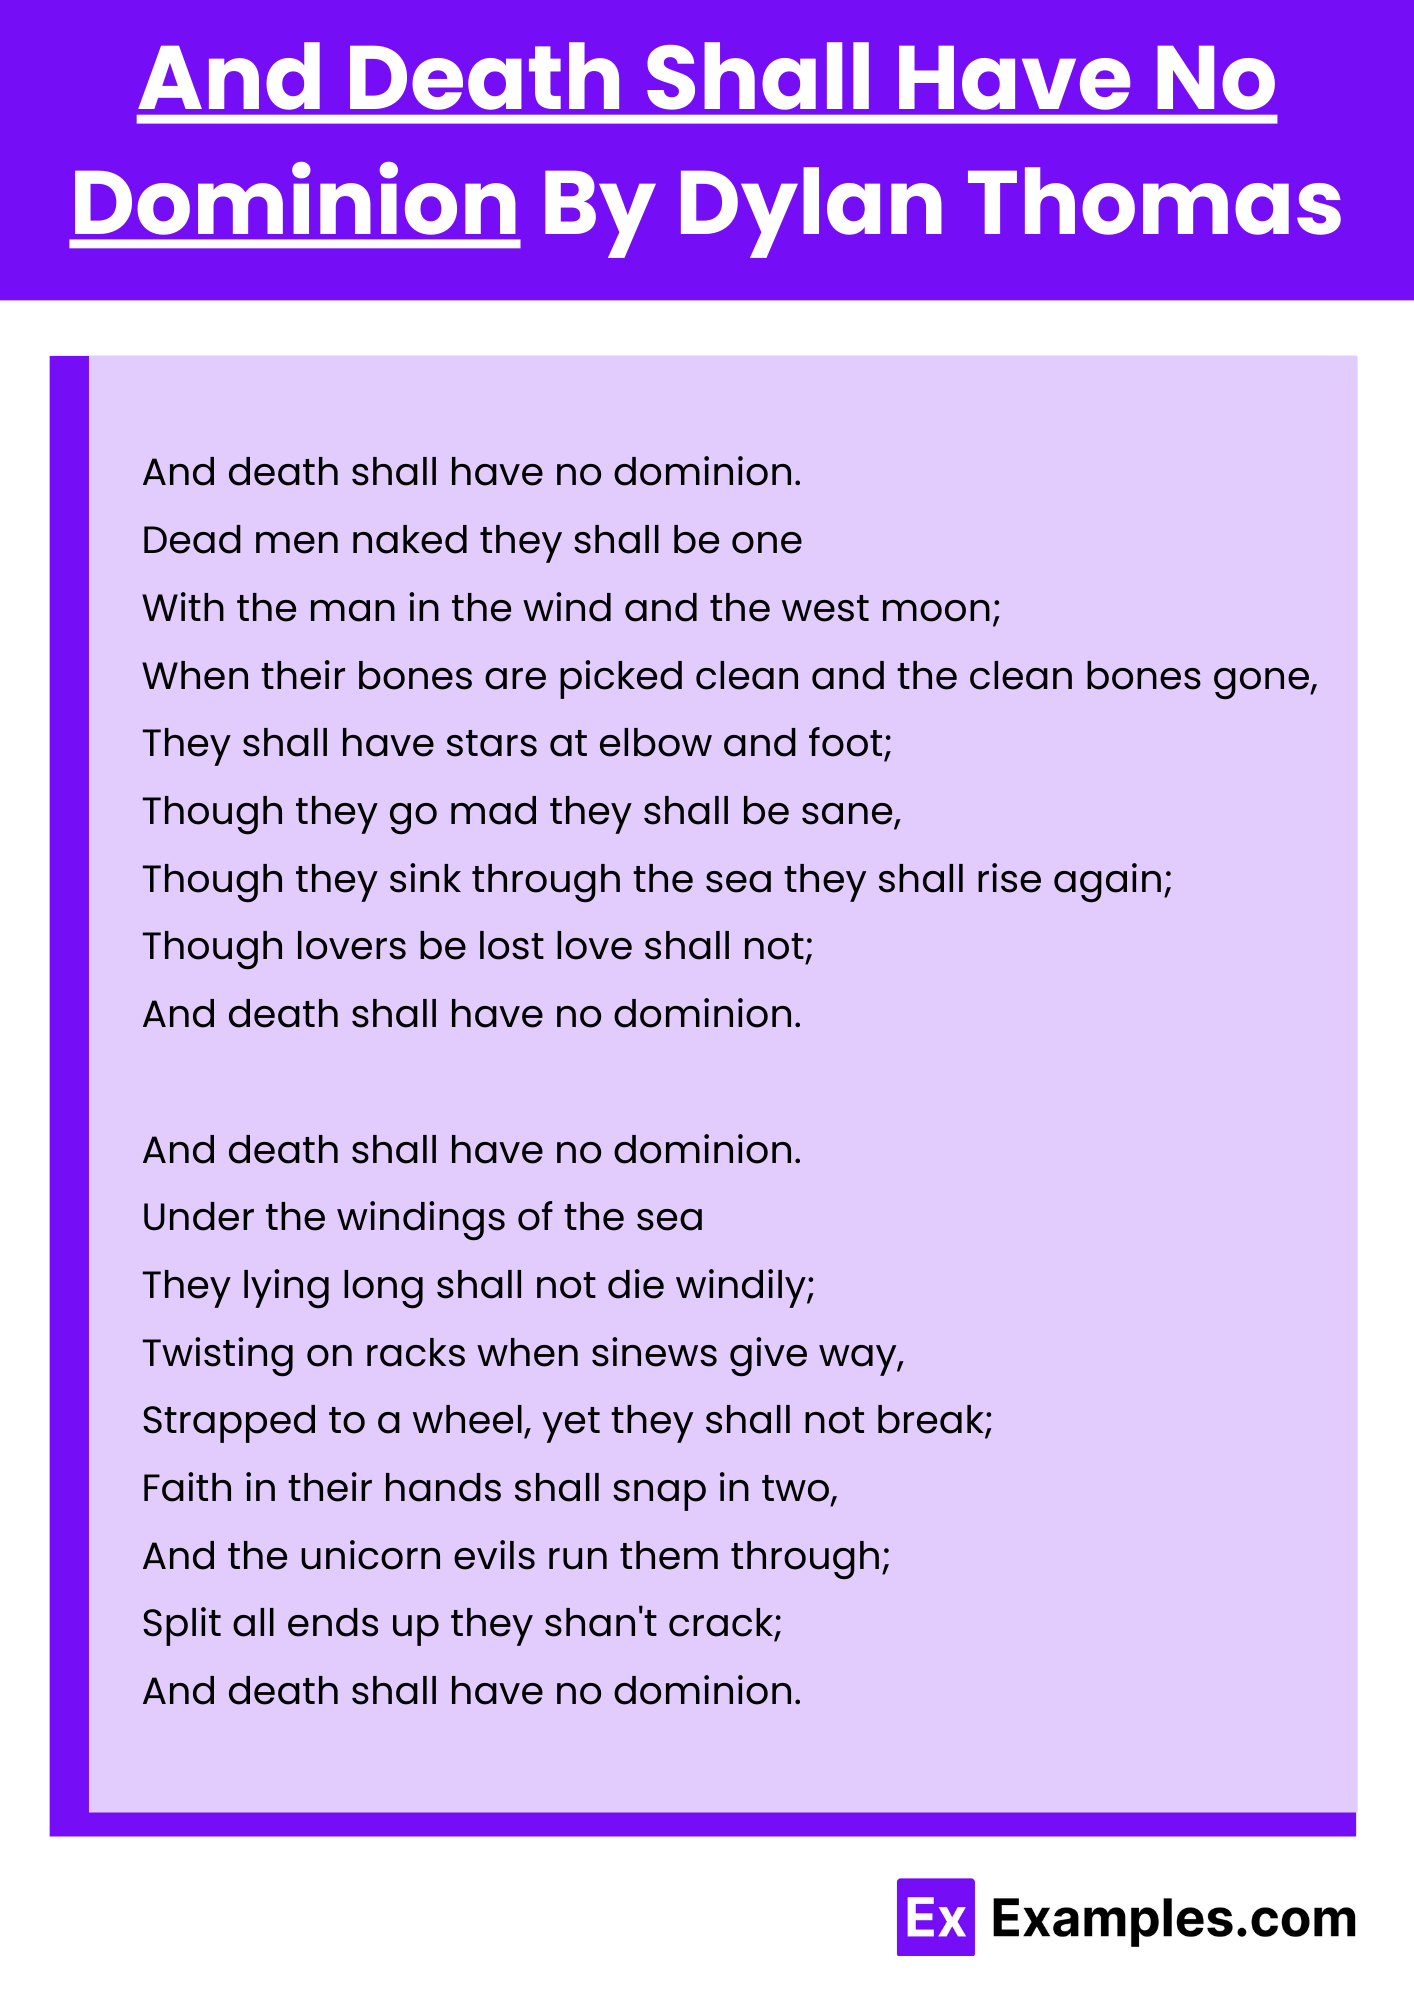 And Death Shall Have No Dominion By Dylan Thomas